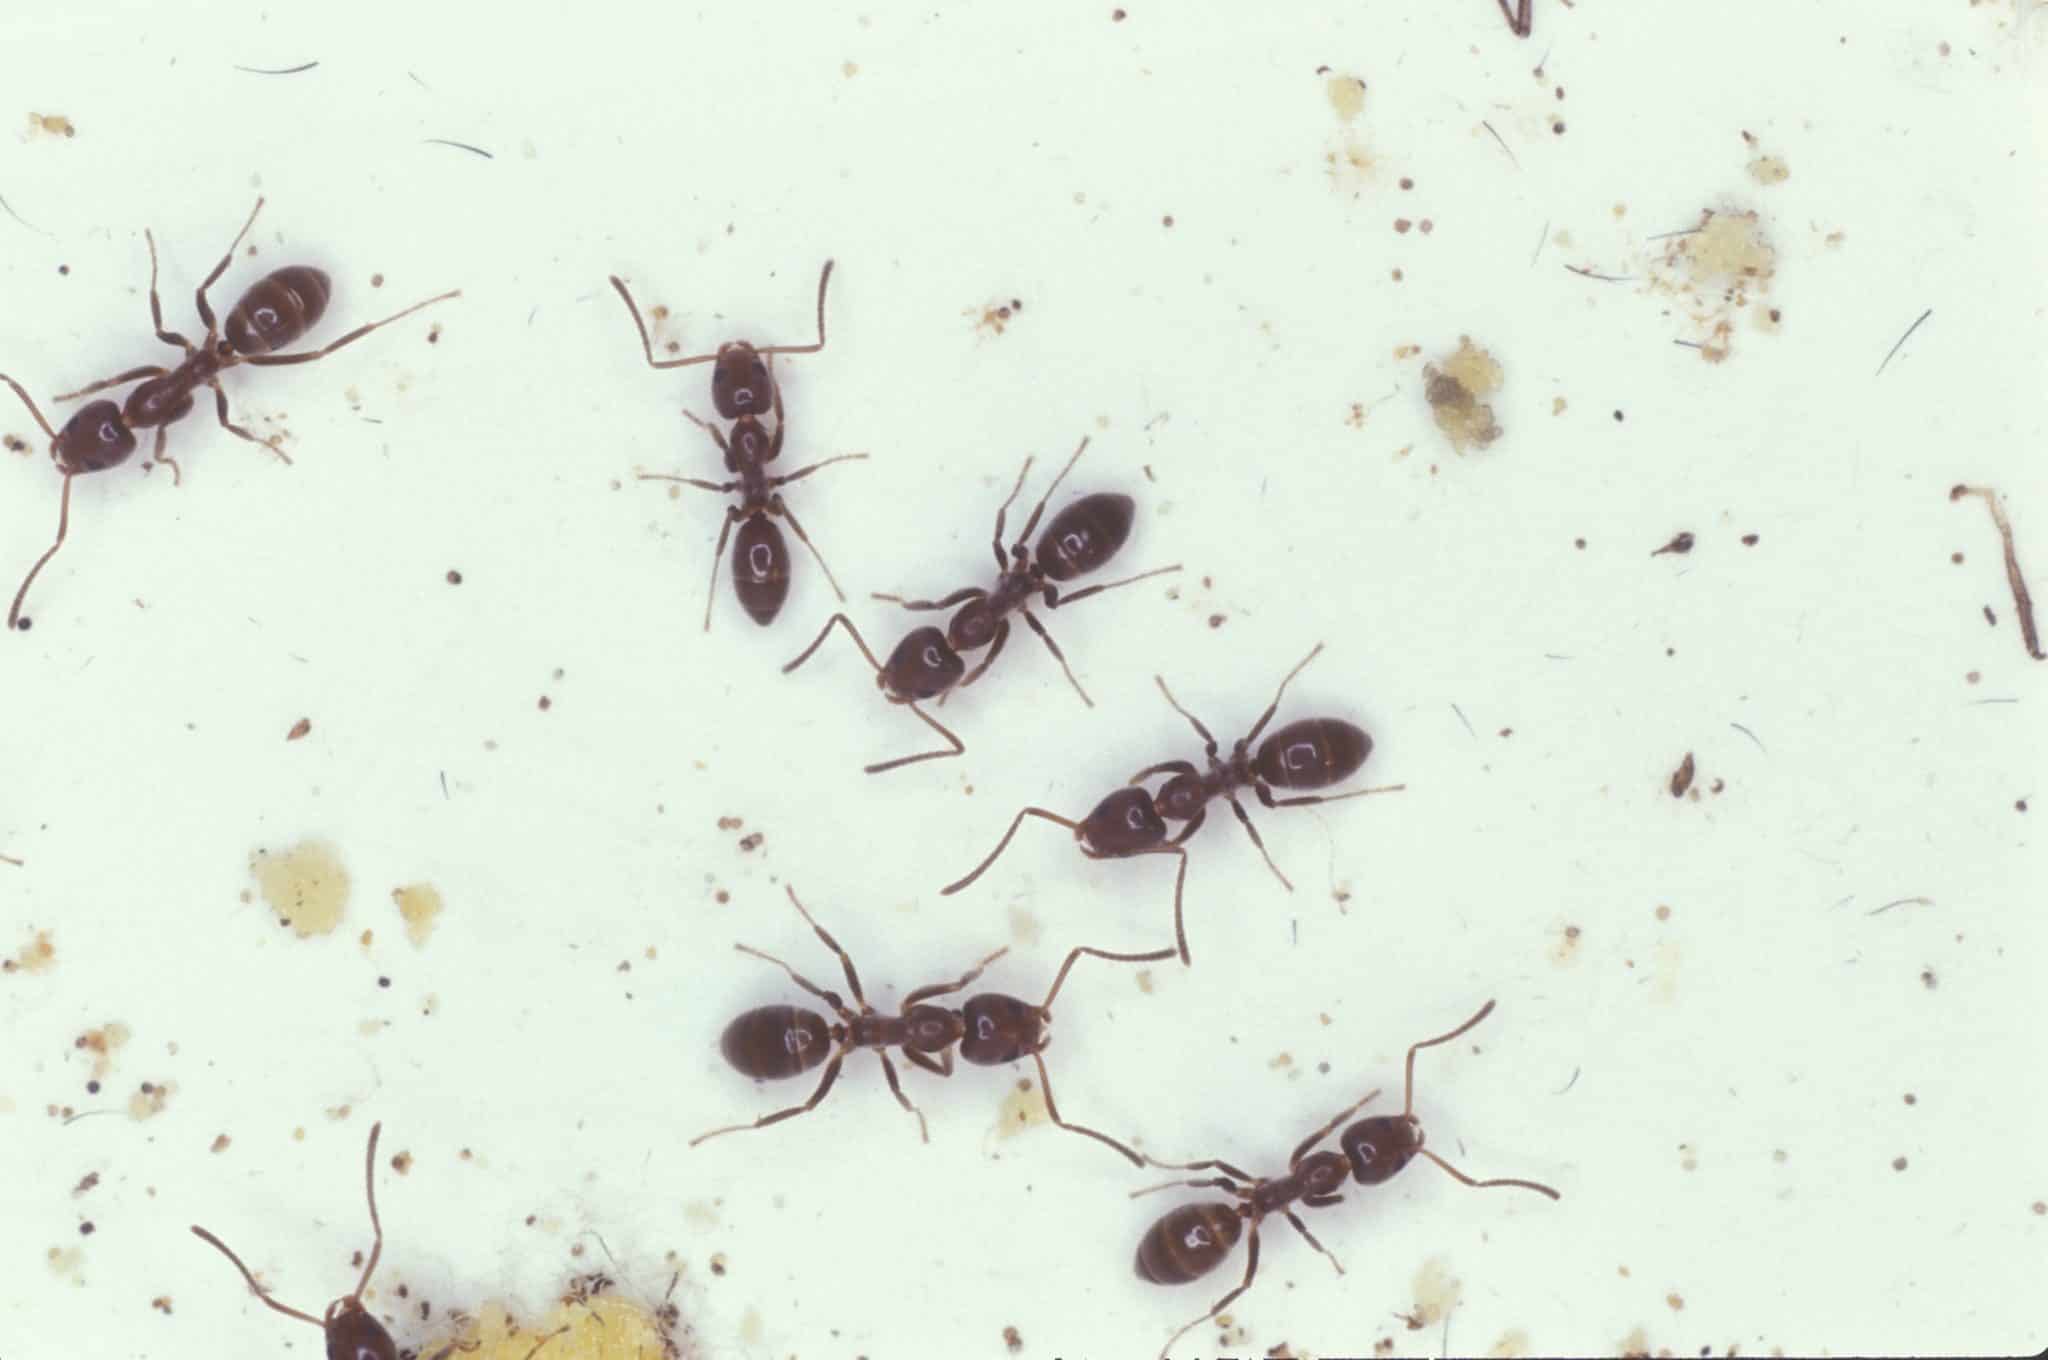 How To Get Rid of Ants- The Ultimate Guide for 2022